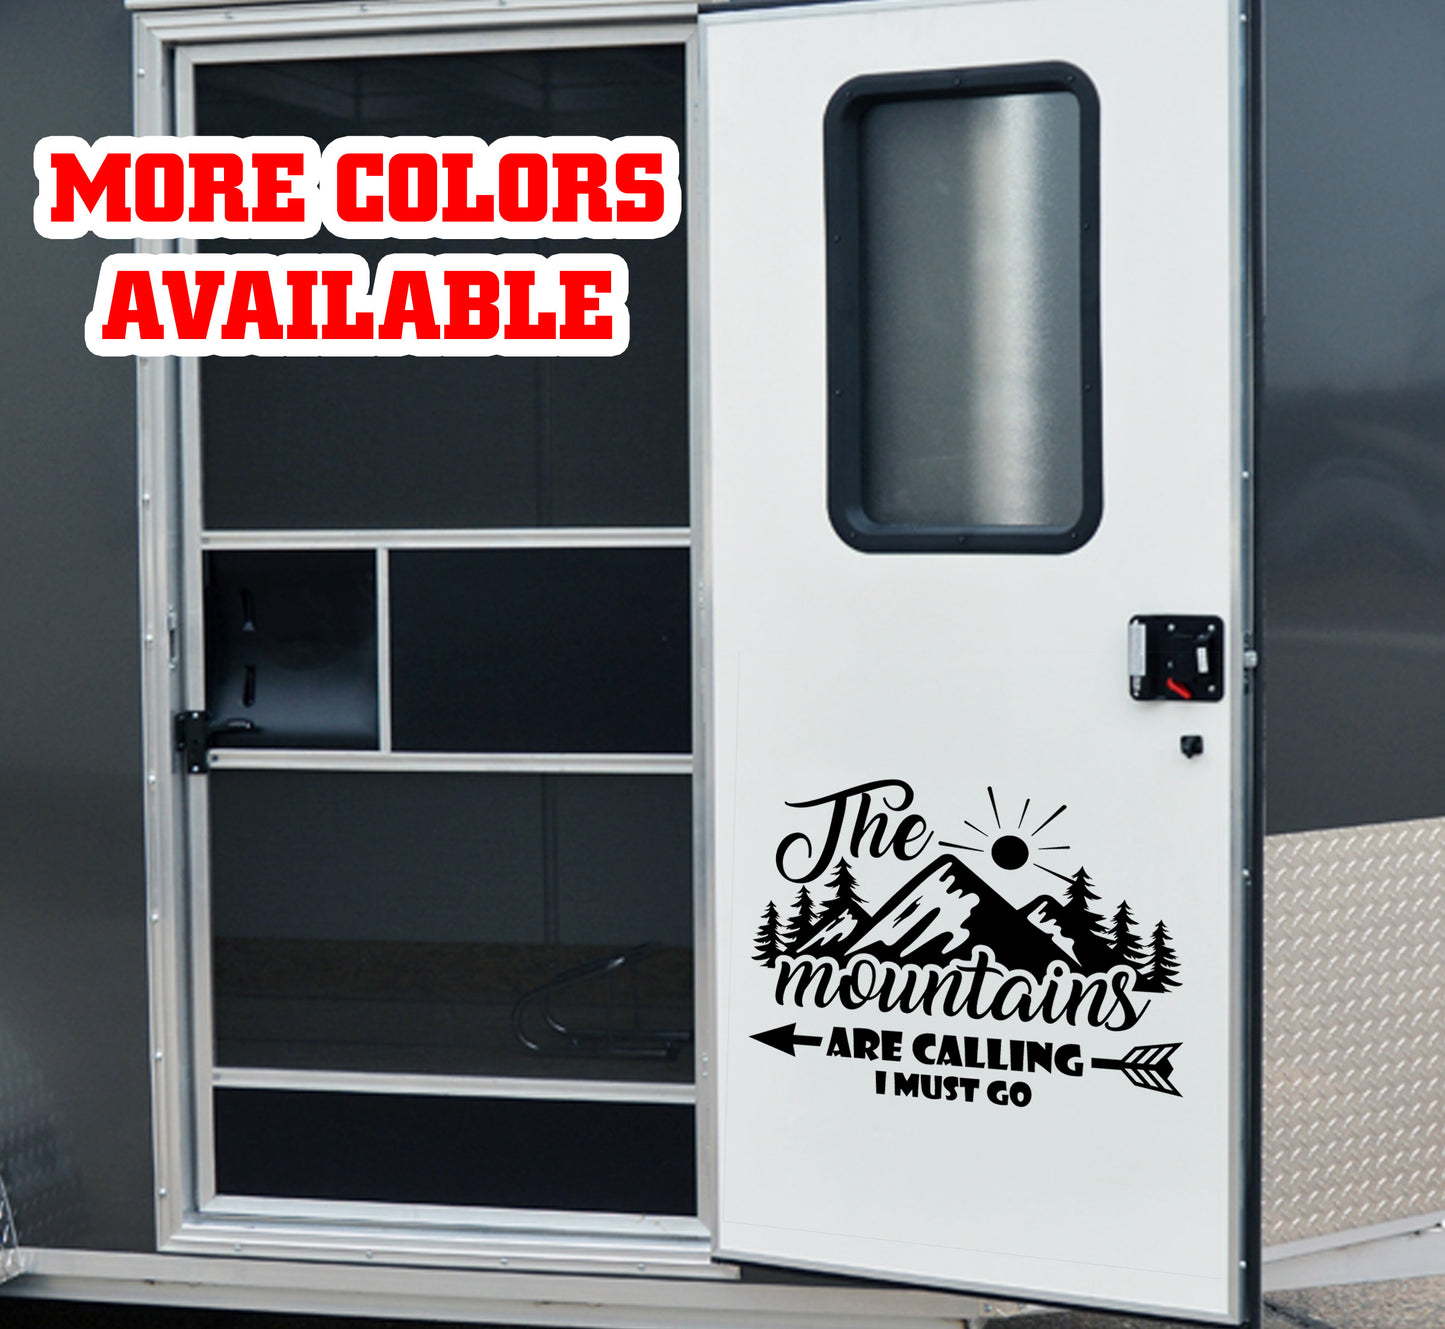 The mountains are calling I must go camping Vinyl Sticker Decal Graphic | RV Slide Decal RV Door Decal Travel Trailer Camper Truck